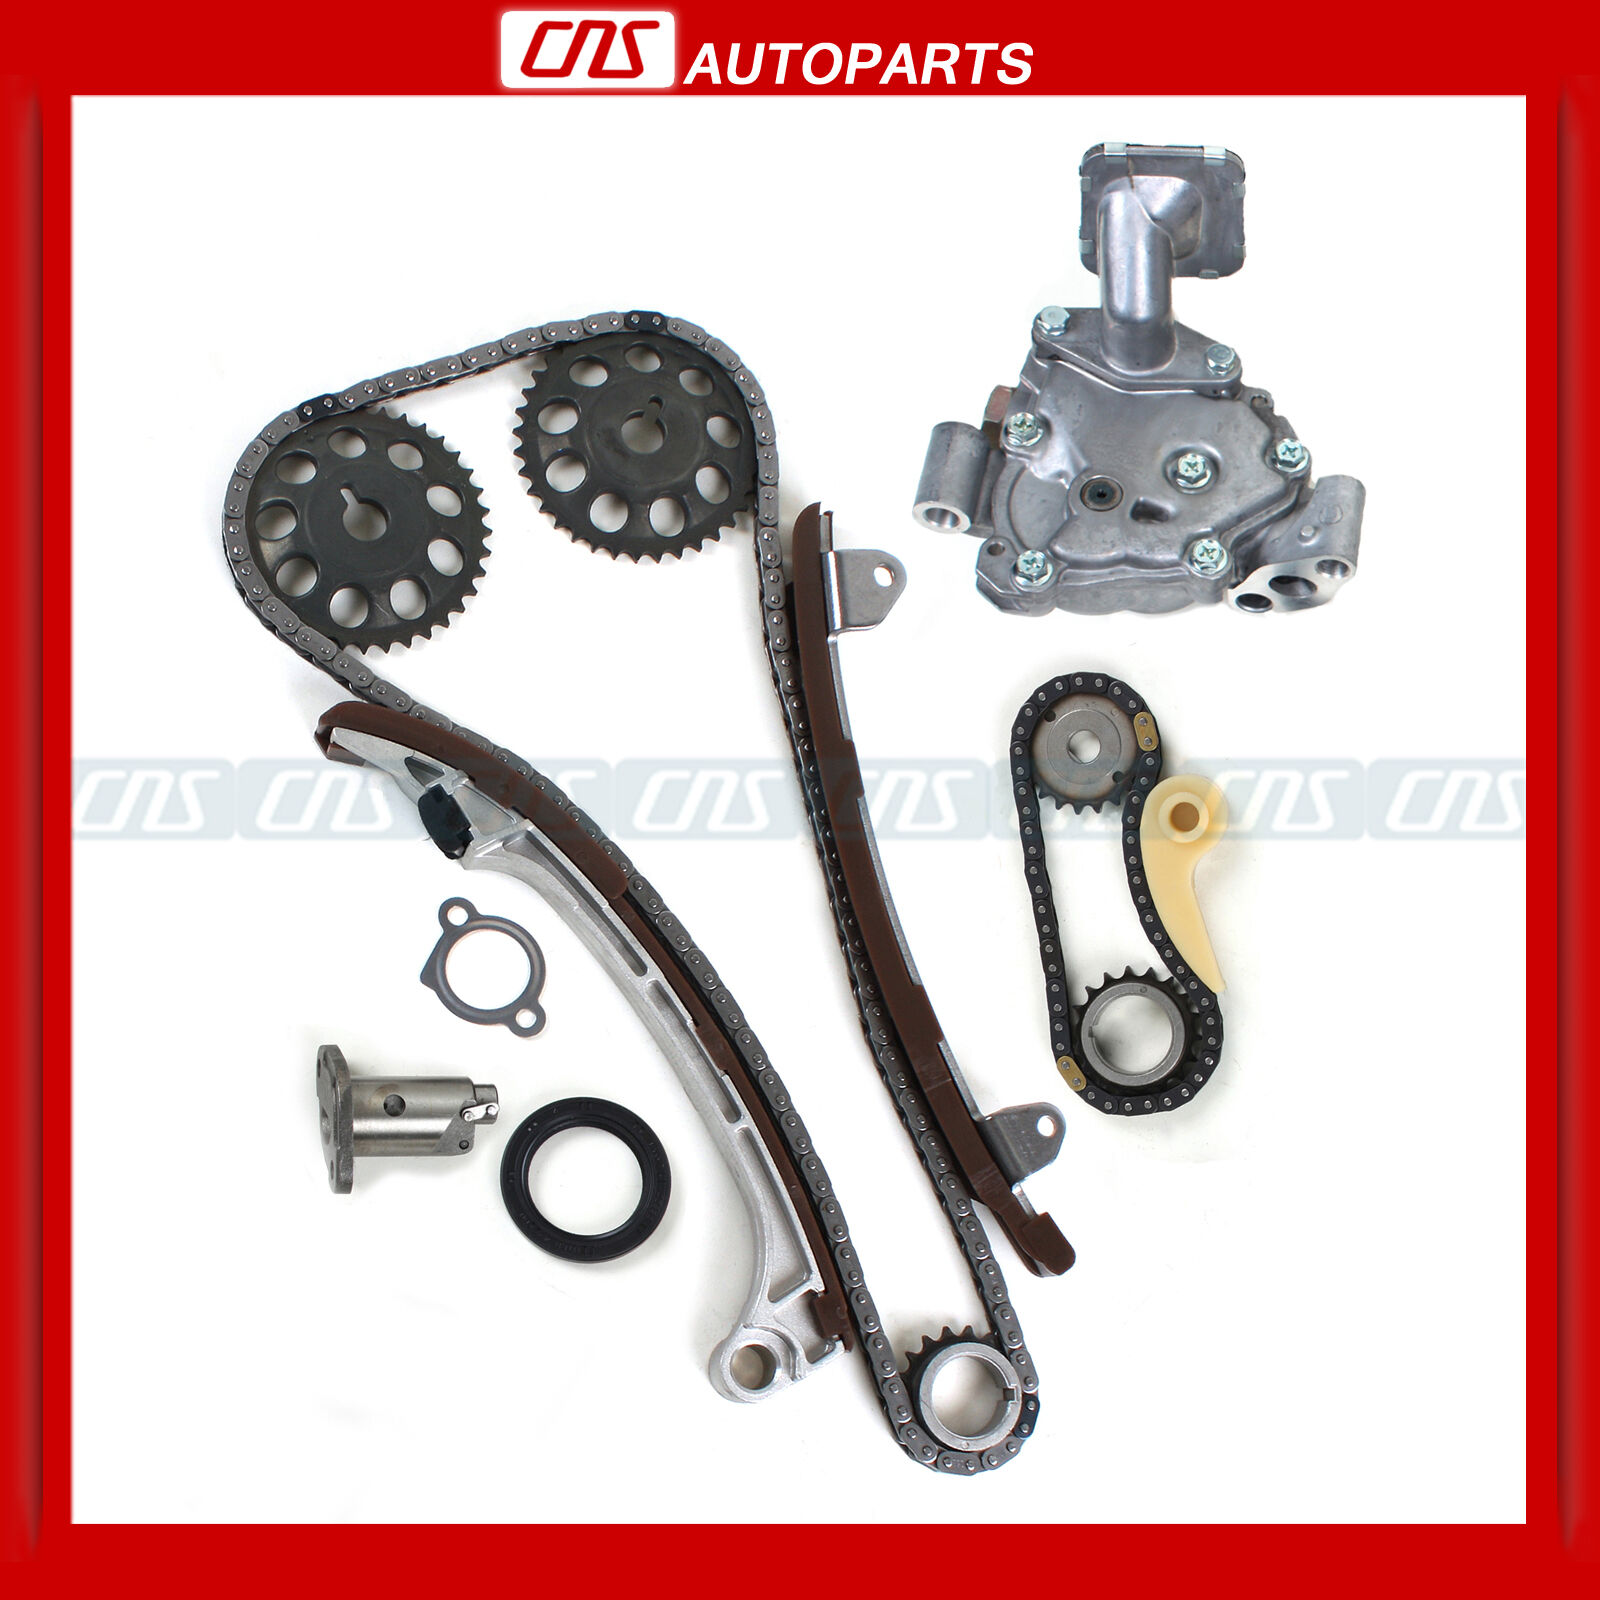 Timing Chain Kit Oil Pump For 01-10 Toyota Scion Camry Hybrid 2.4L 2AZFE